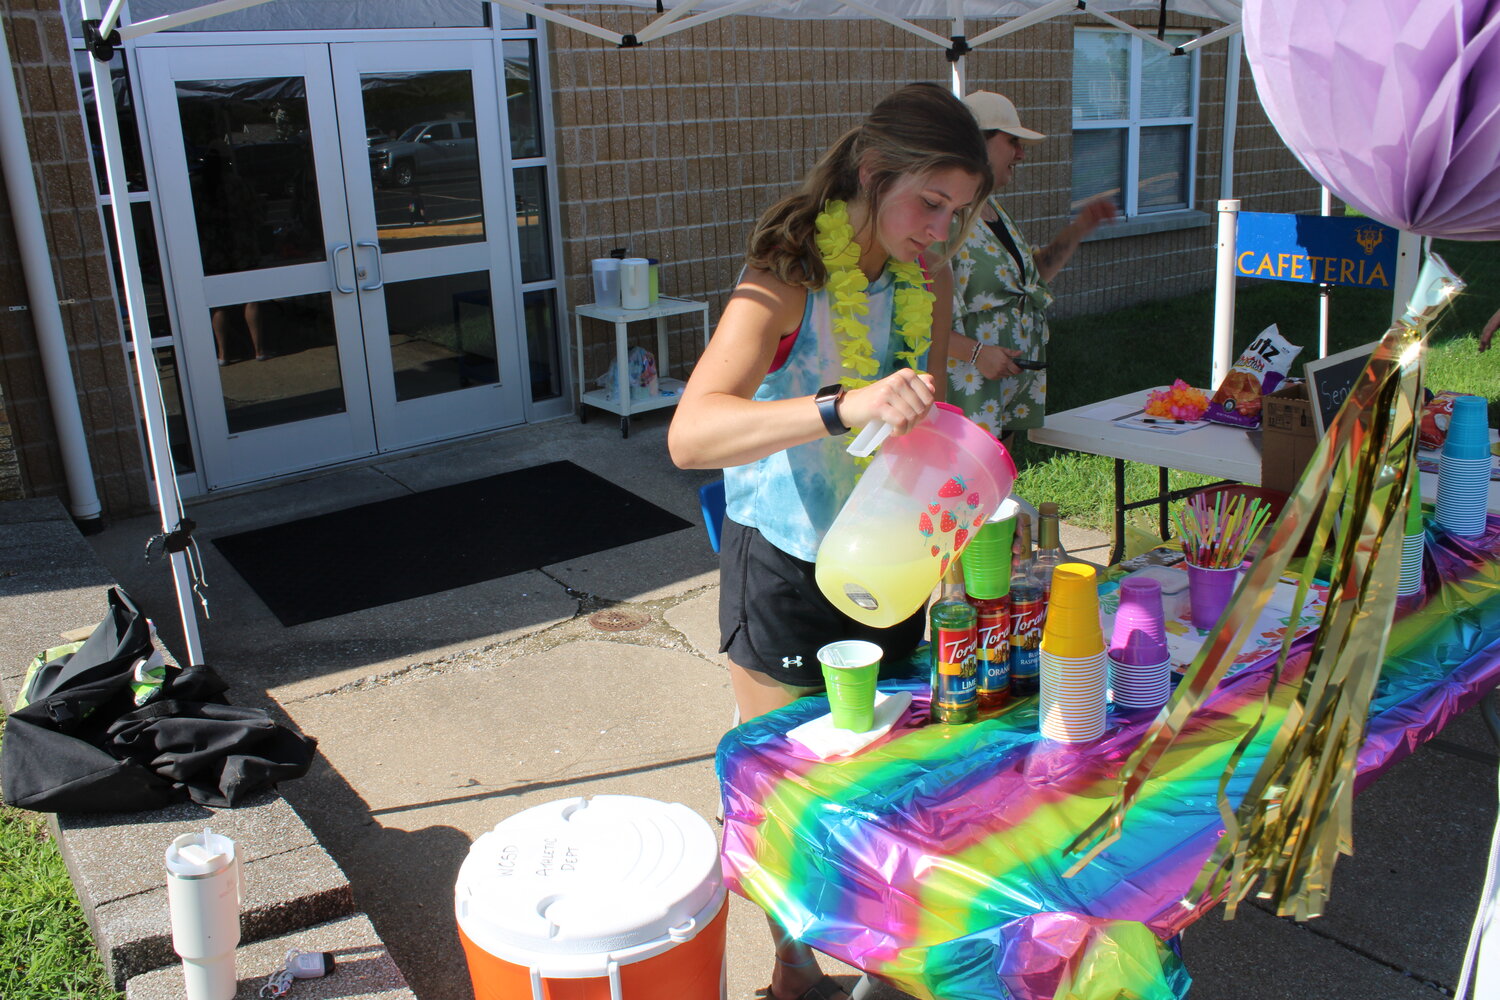 Sam Finch was helping run the lemonade stand that provided free drinks for the students who were out with their designs. The lemonade was provided by the class as a whole so no one had to pay for it.